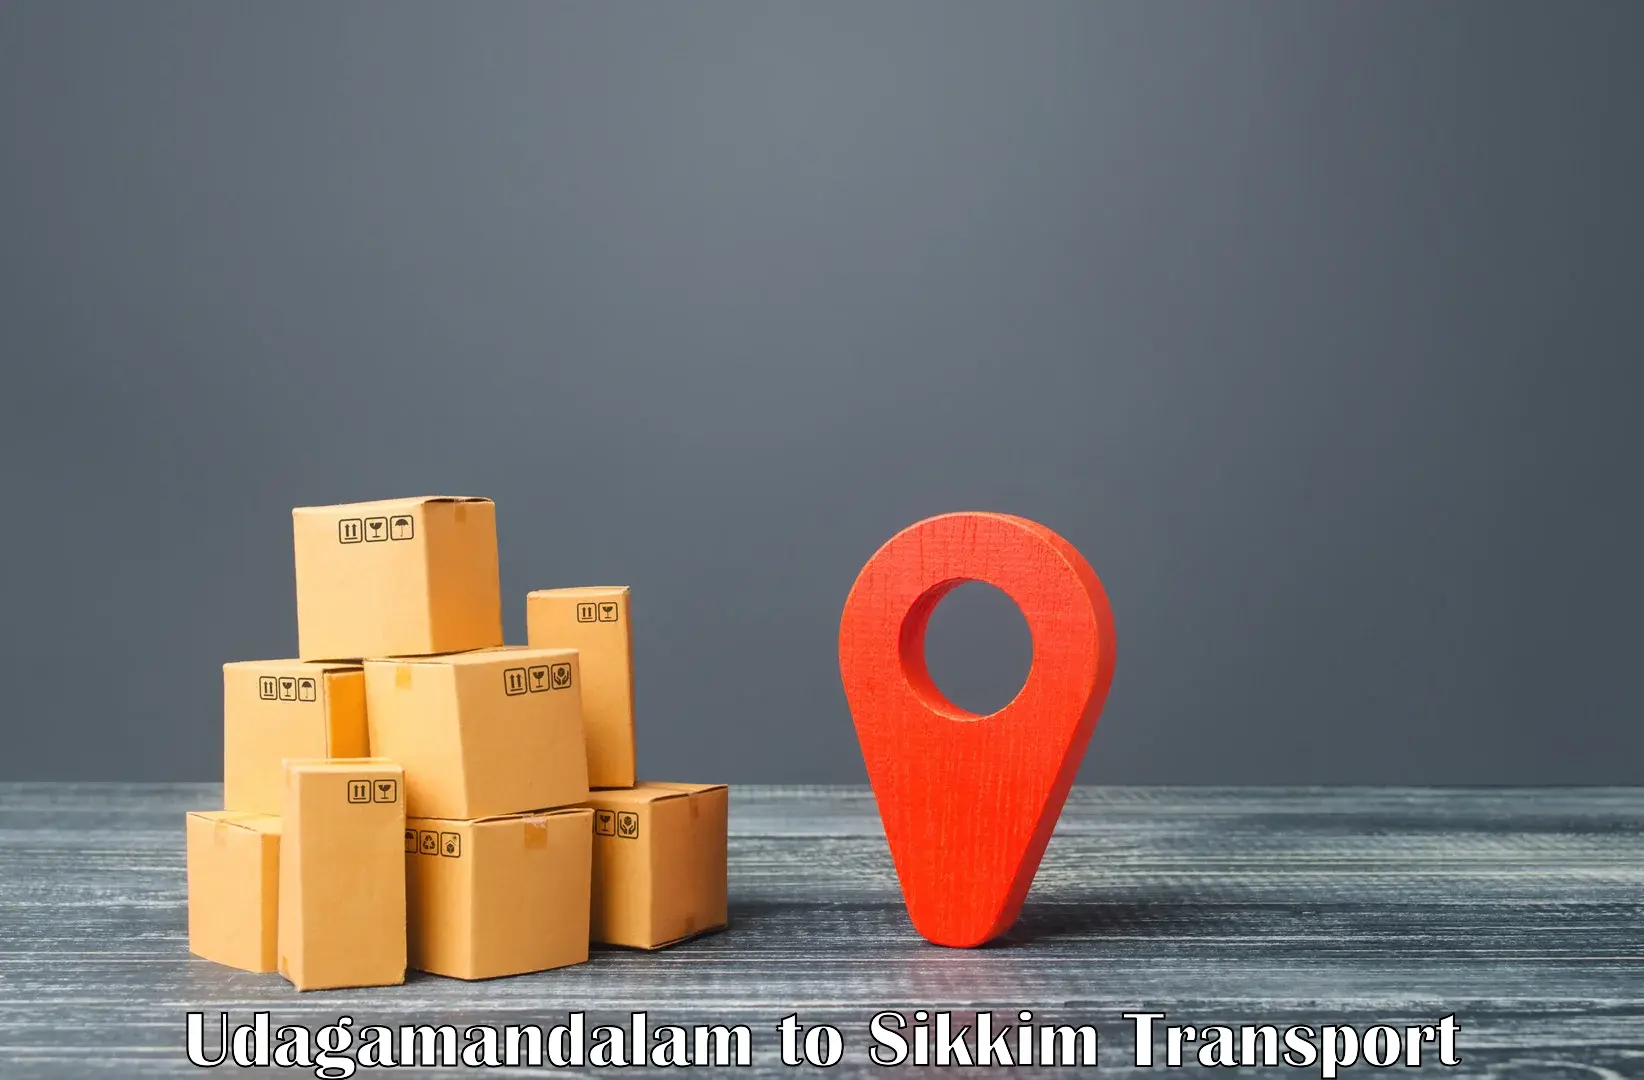 Goods delivery service Udagamandalam to Sikkim